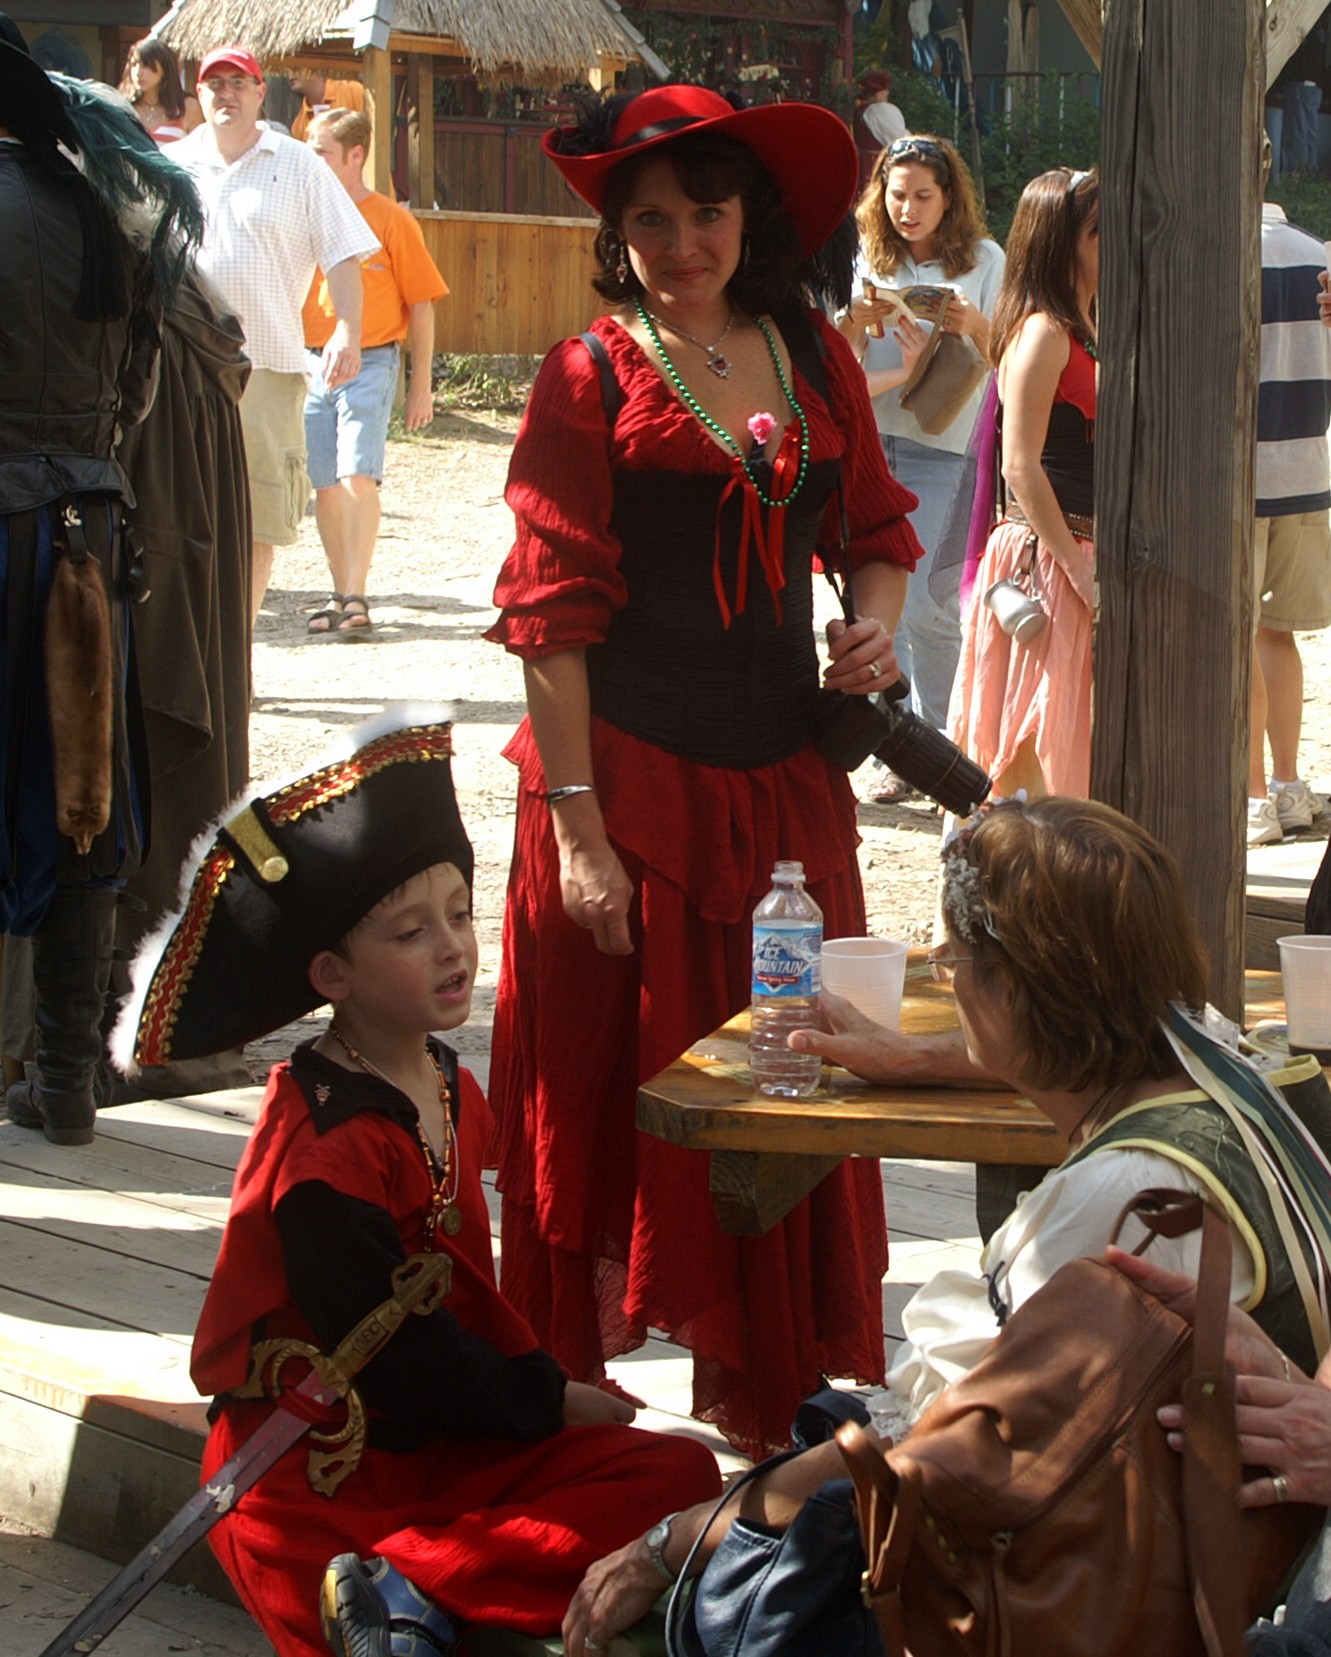 Red Pirate With Mother